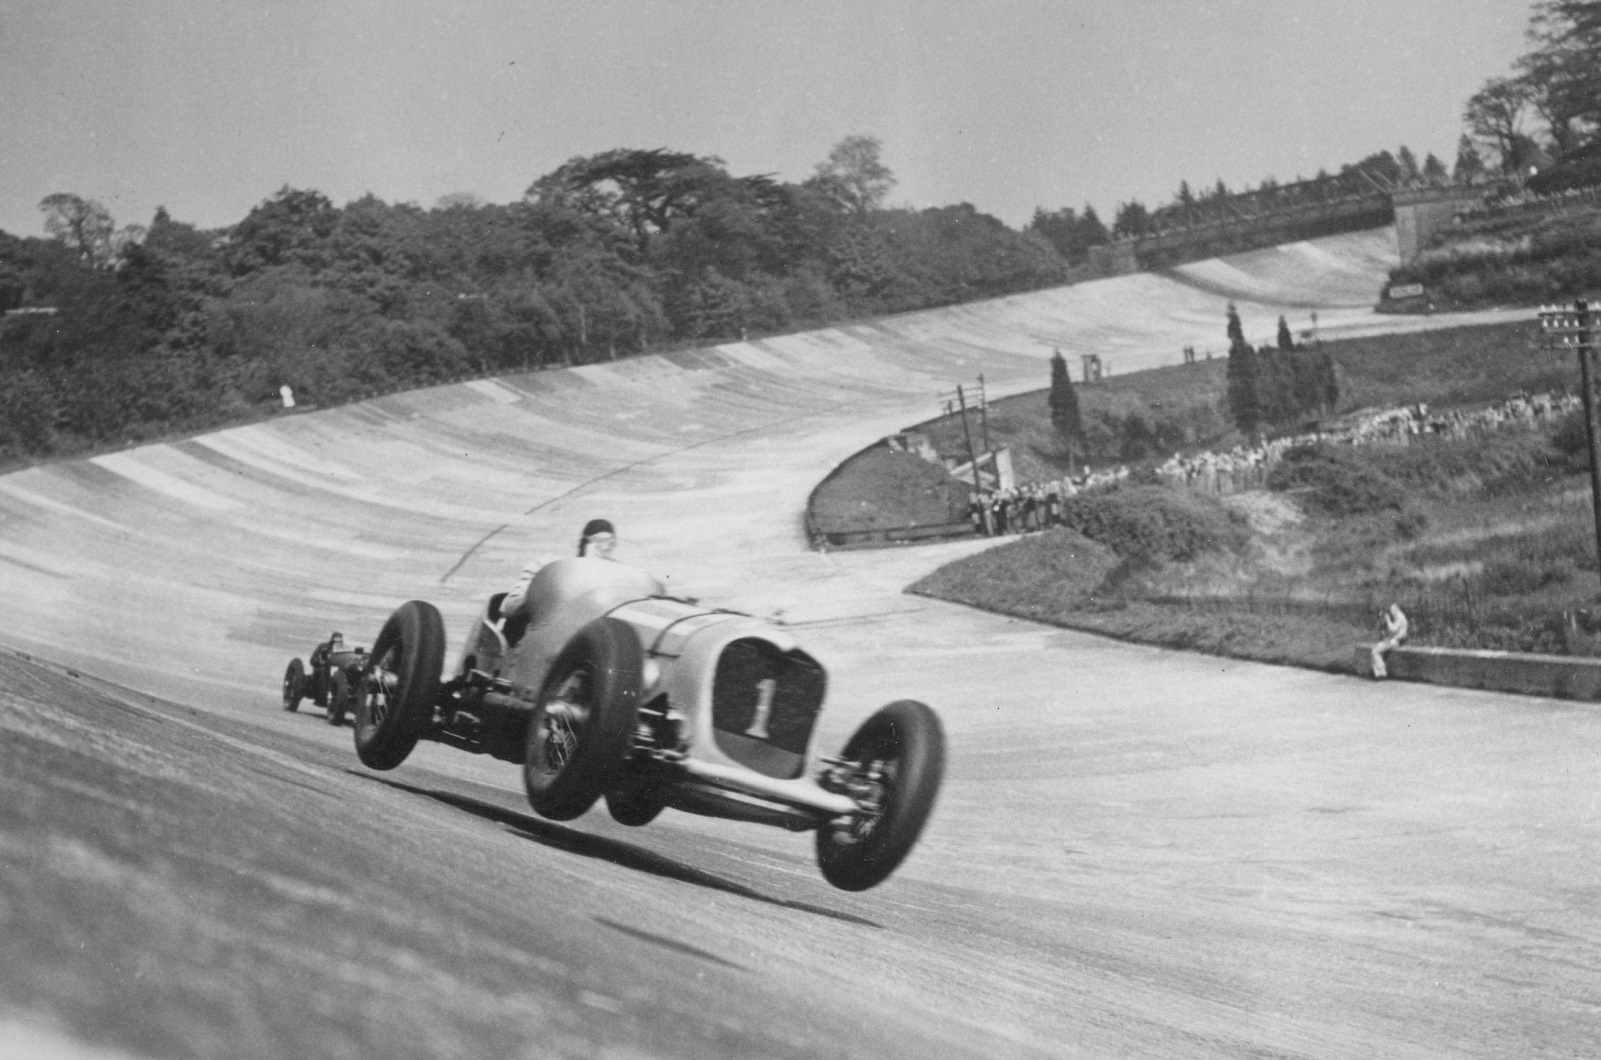 <p>The Napier-Railton hails from an era when more power meant going bigger, so it employed a 23.9-liter <strong>Napier Lion</strong> aero engine to achieve a 24-hour record of <strong>150.6mph</strong> at Bonneville Salt Flats in 1936. With a reputed <strong>594 hp</strong> at just 2500rpm, the 12-cylinder Lion engine had three banks of four cylinders in a ‘broad arrow’ configuration. This made it more compact and it also used other aero industry features such as dual ignition.</p><p>To keep the engine fueled, a <strong>65-liter</strong> tank sat right behind the driver to deal with the car’s <strong>5mpg</strong> thirst. After the Second World War, the Napier-Railton found a second life testing aircraft braking parachutes at high speeds.</p>